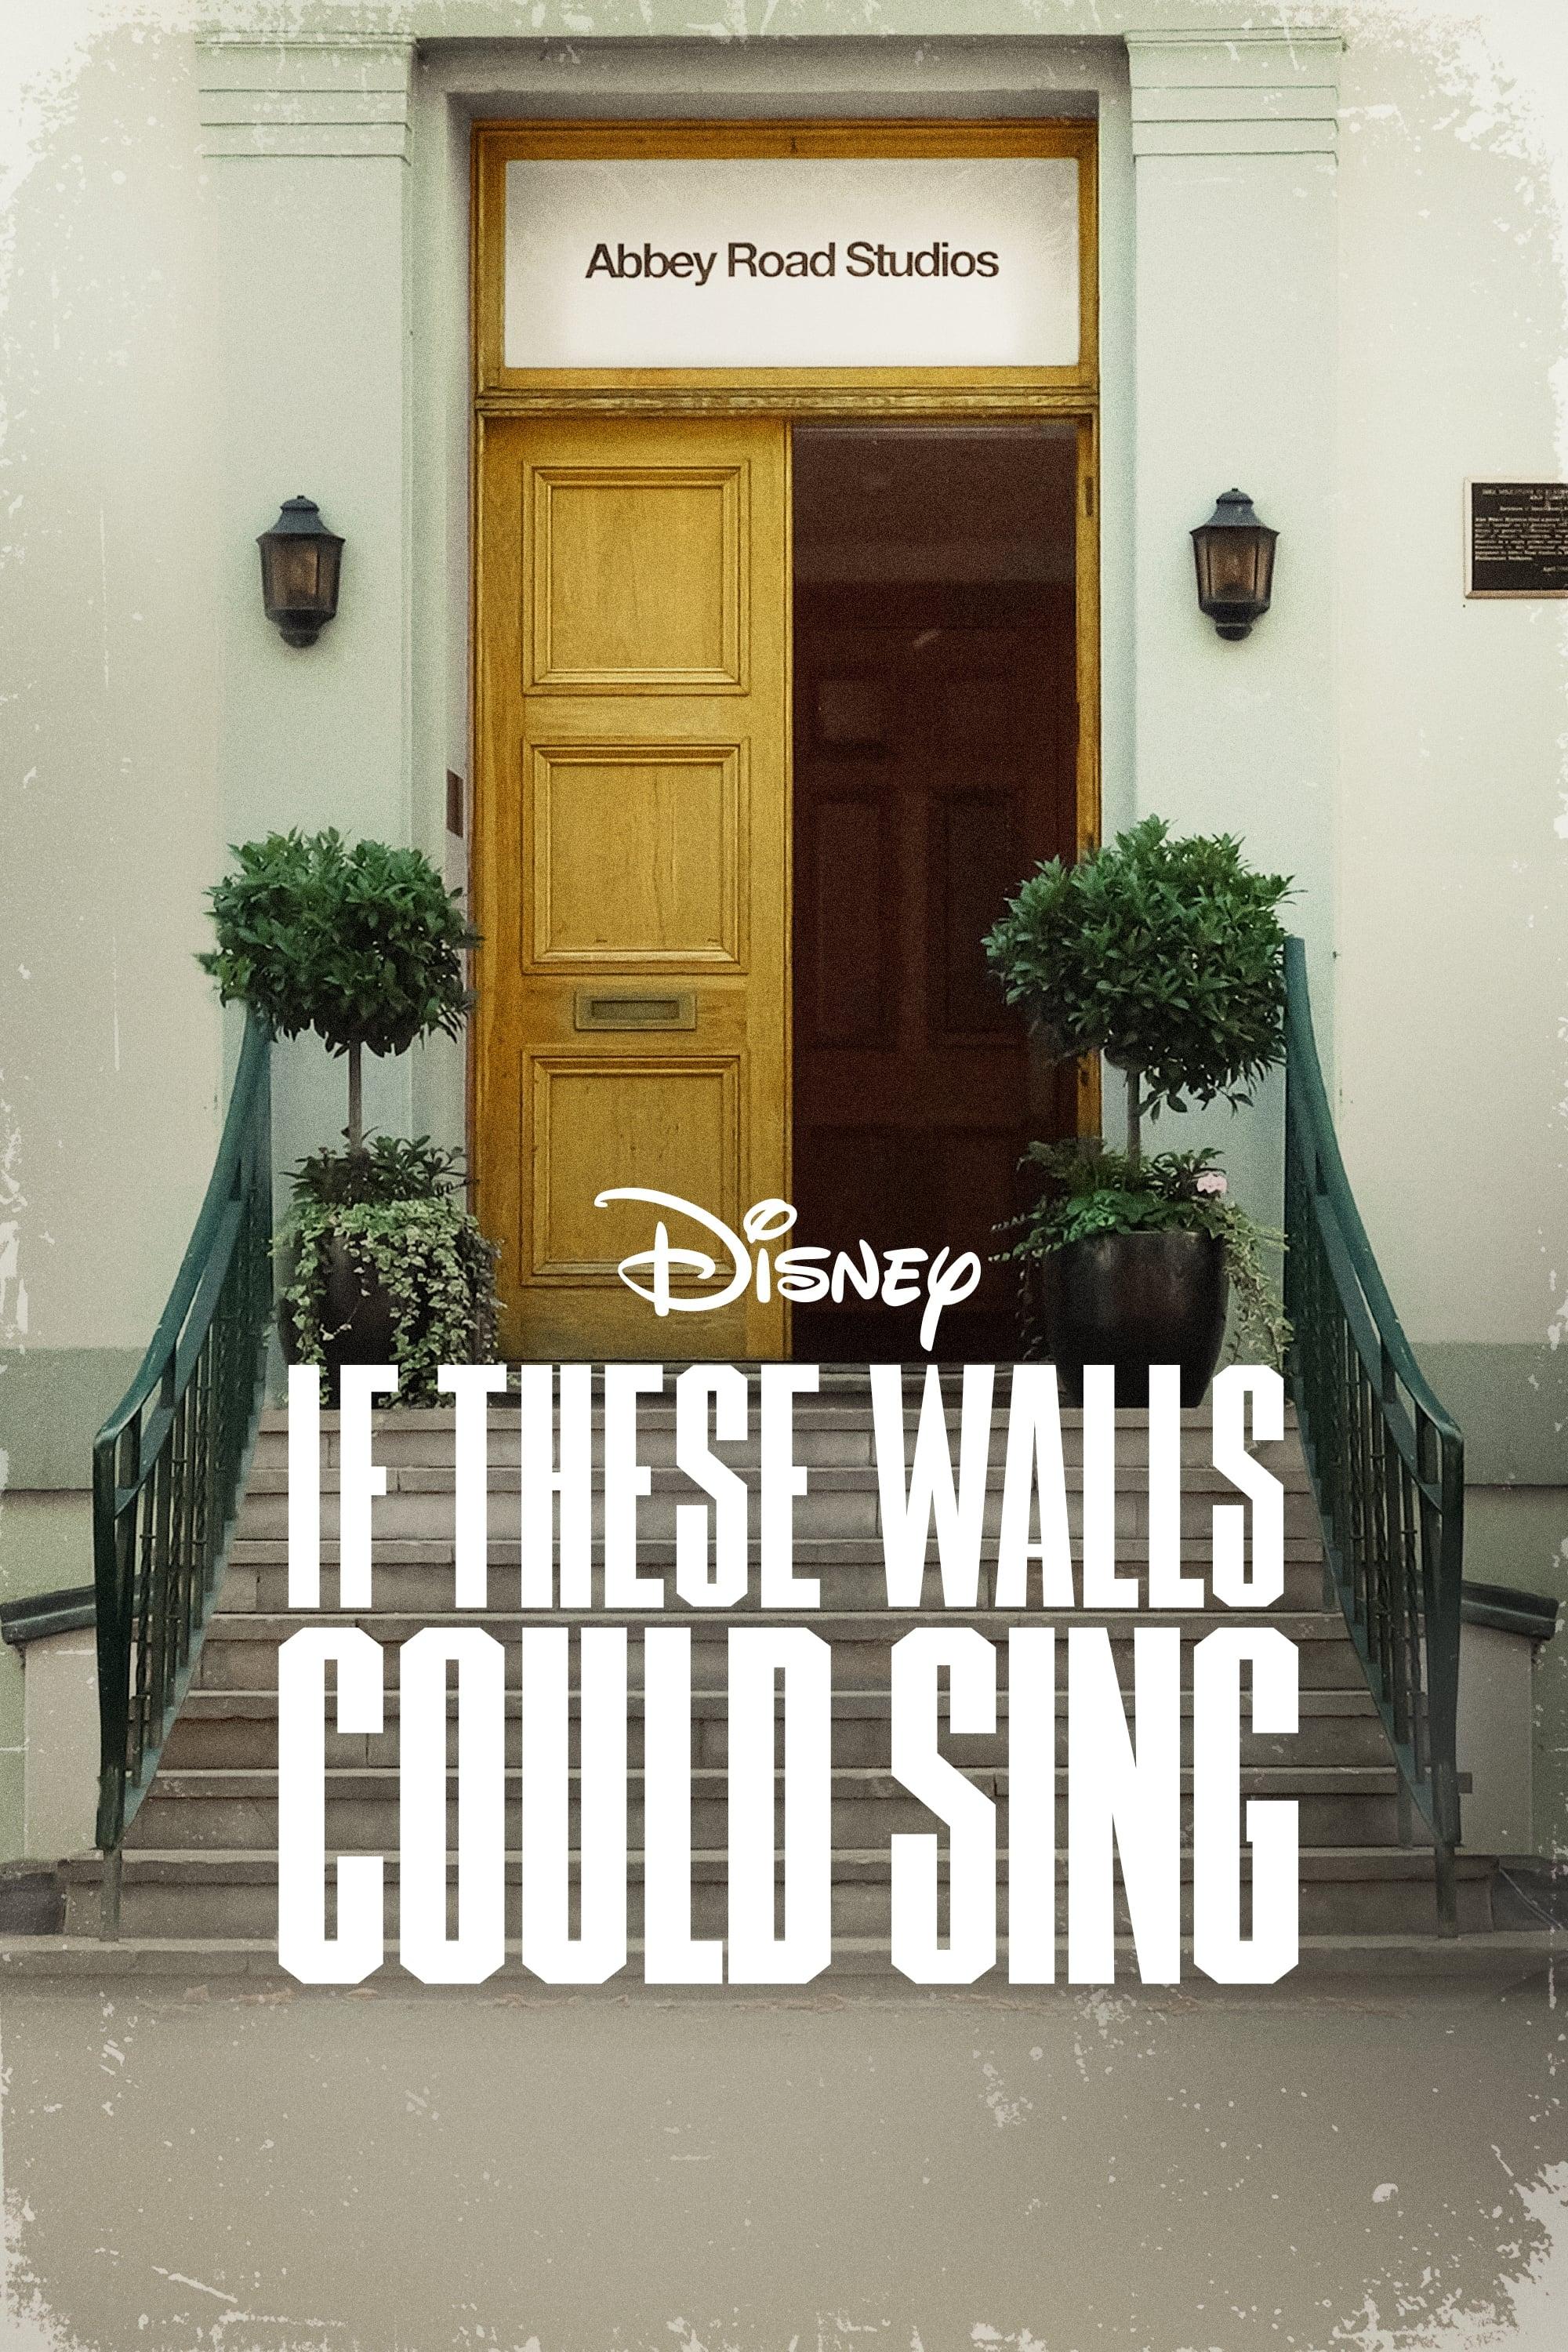 If These Walls Could Sing poster